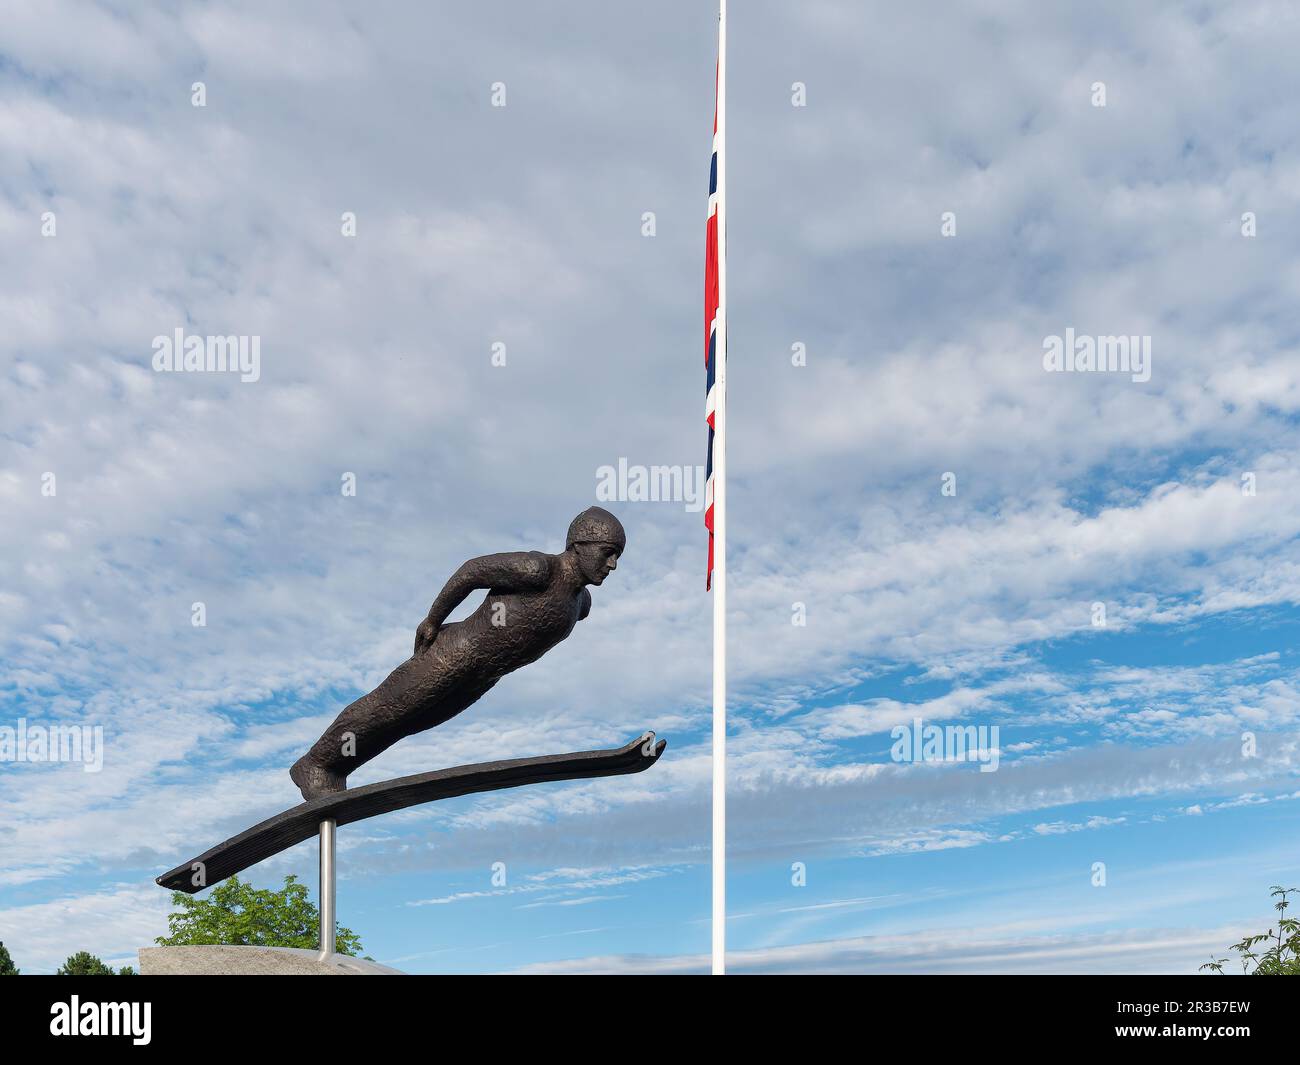 The Ski Jumper, a sculpture created by Nico Widerberg and donated to the people of Norway by Tandberg Eiendom. The sculpture is located at Frognersete Stock Photo